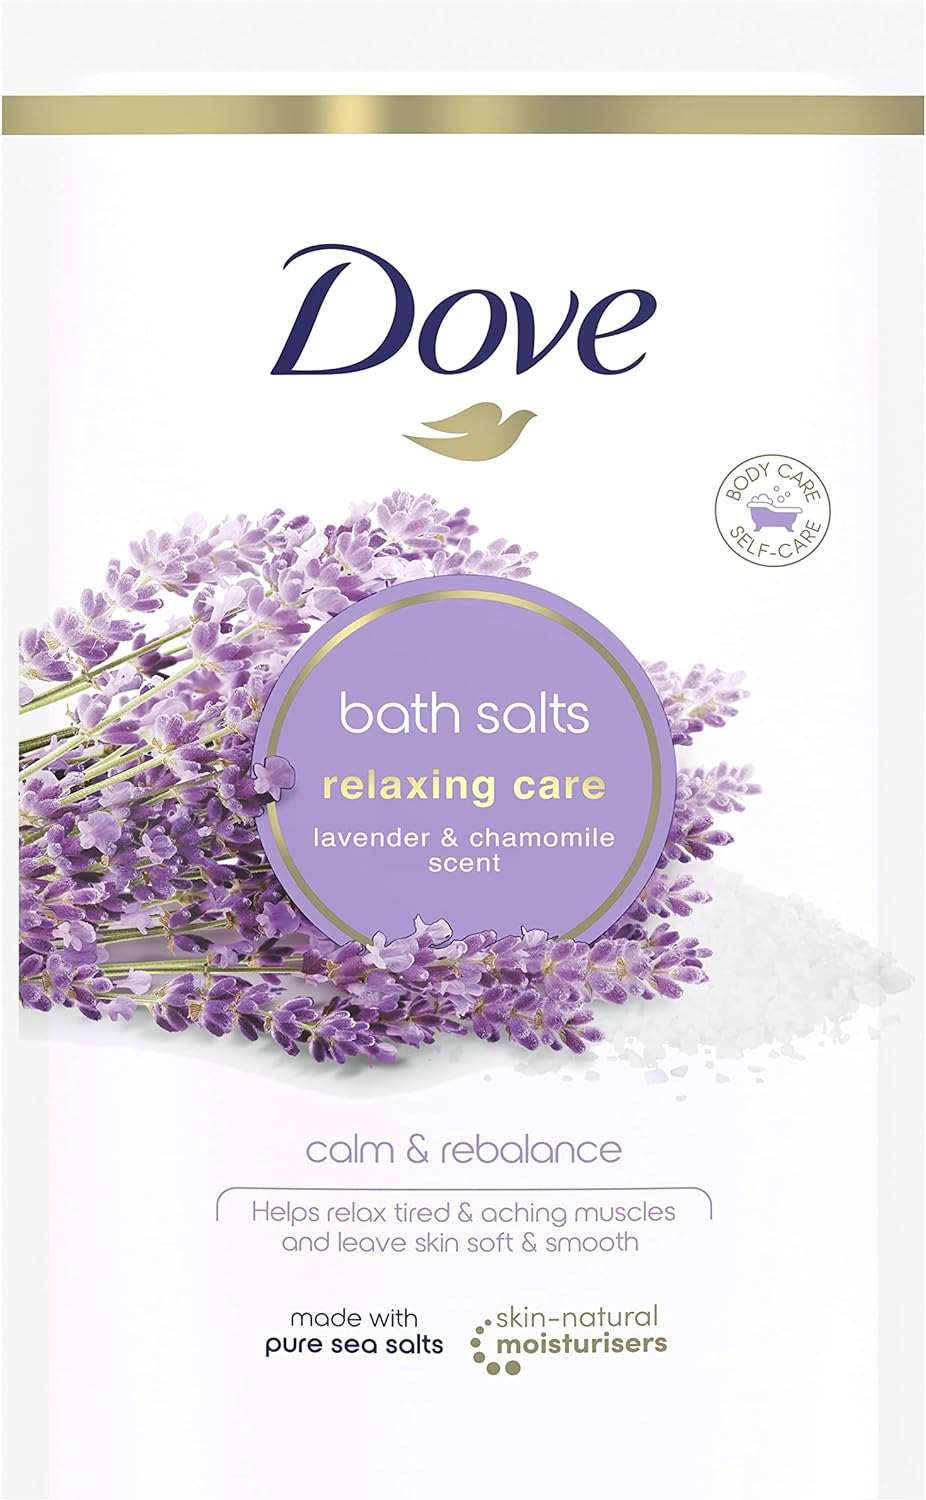 Dove Lavender & Chamomile Relaxing Care with skin-natural moisturisers Bath Salts relaxing your mind & body, leaving your skin smooth & soft 900 g